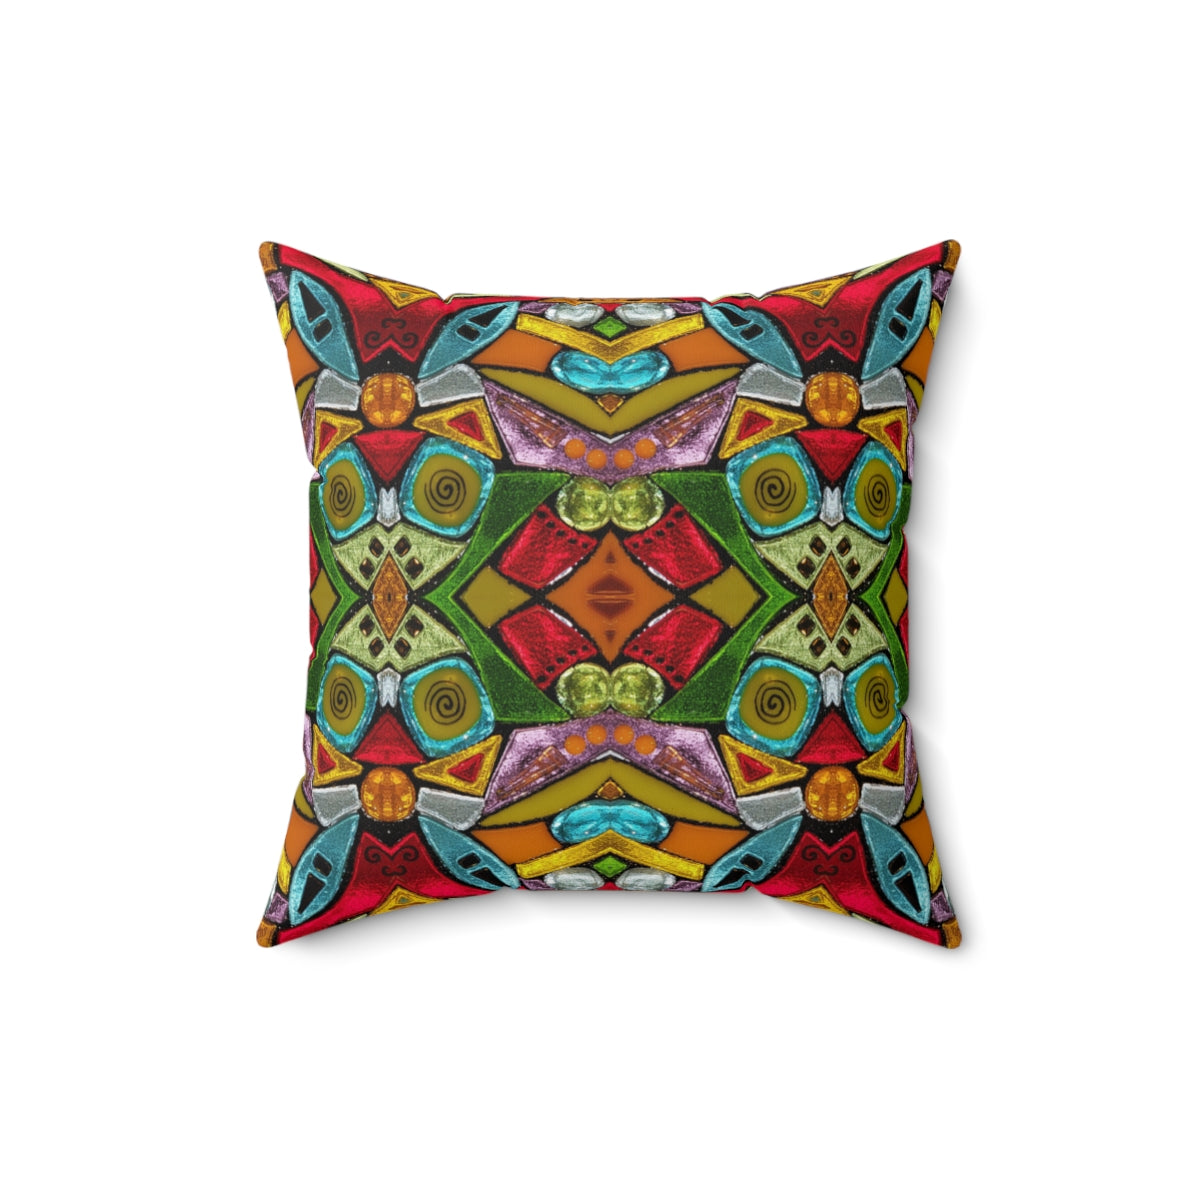 decorative couch pillow in Abstraction design